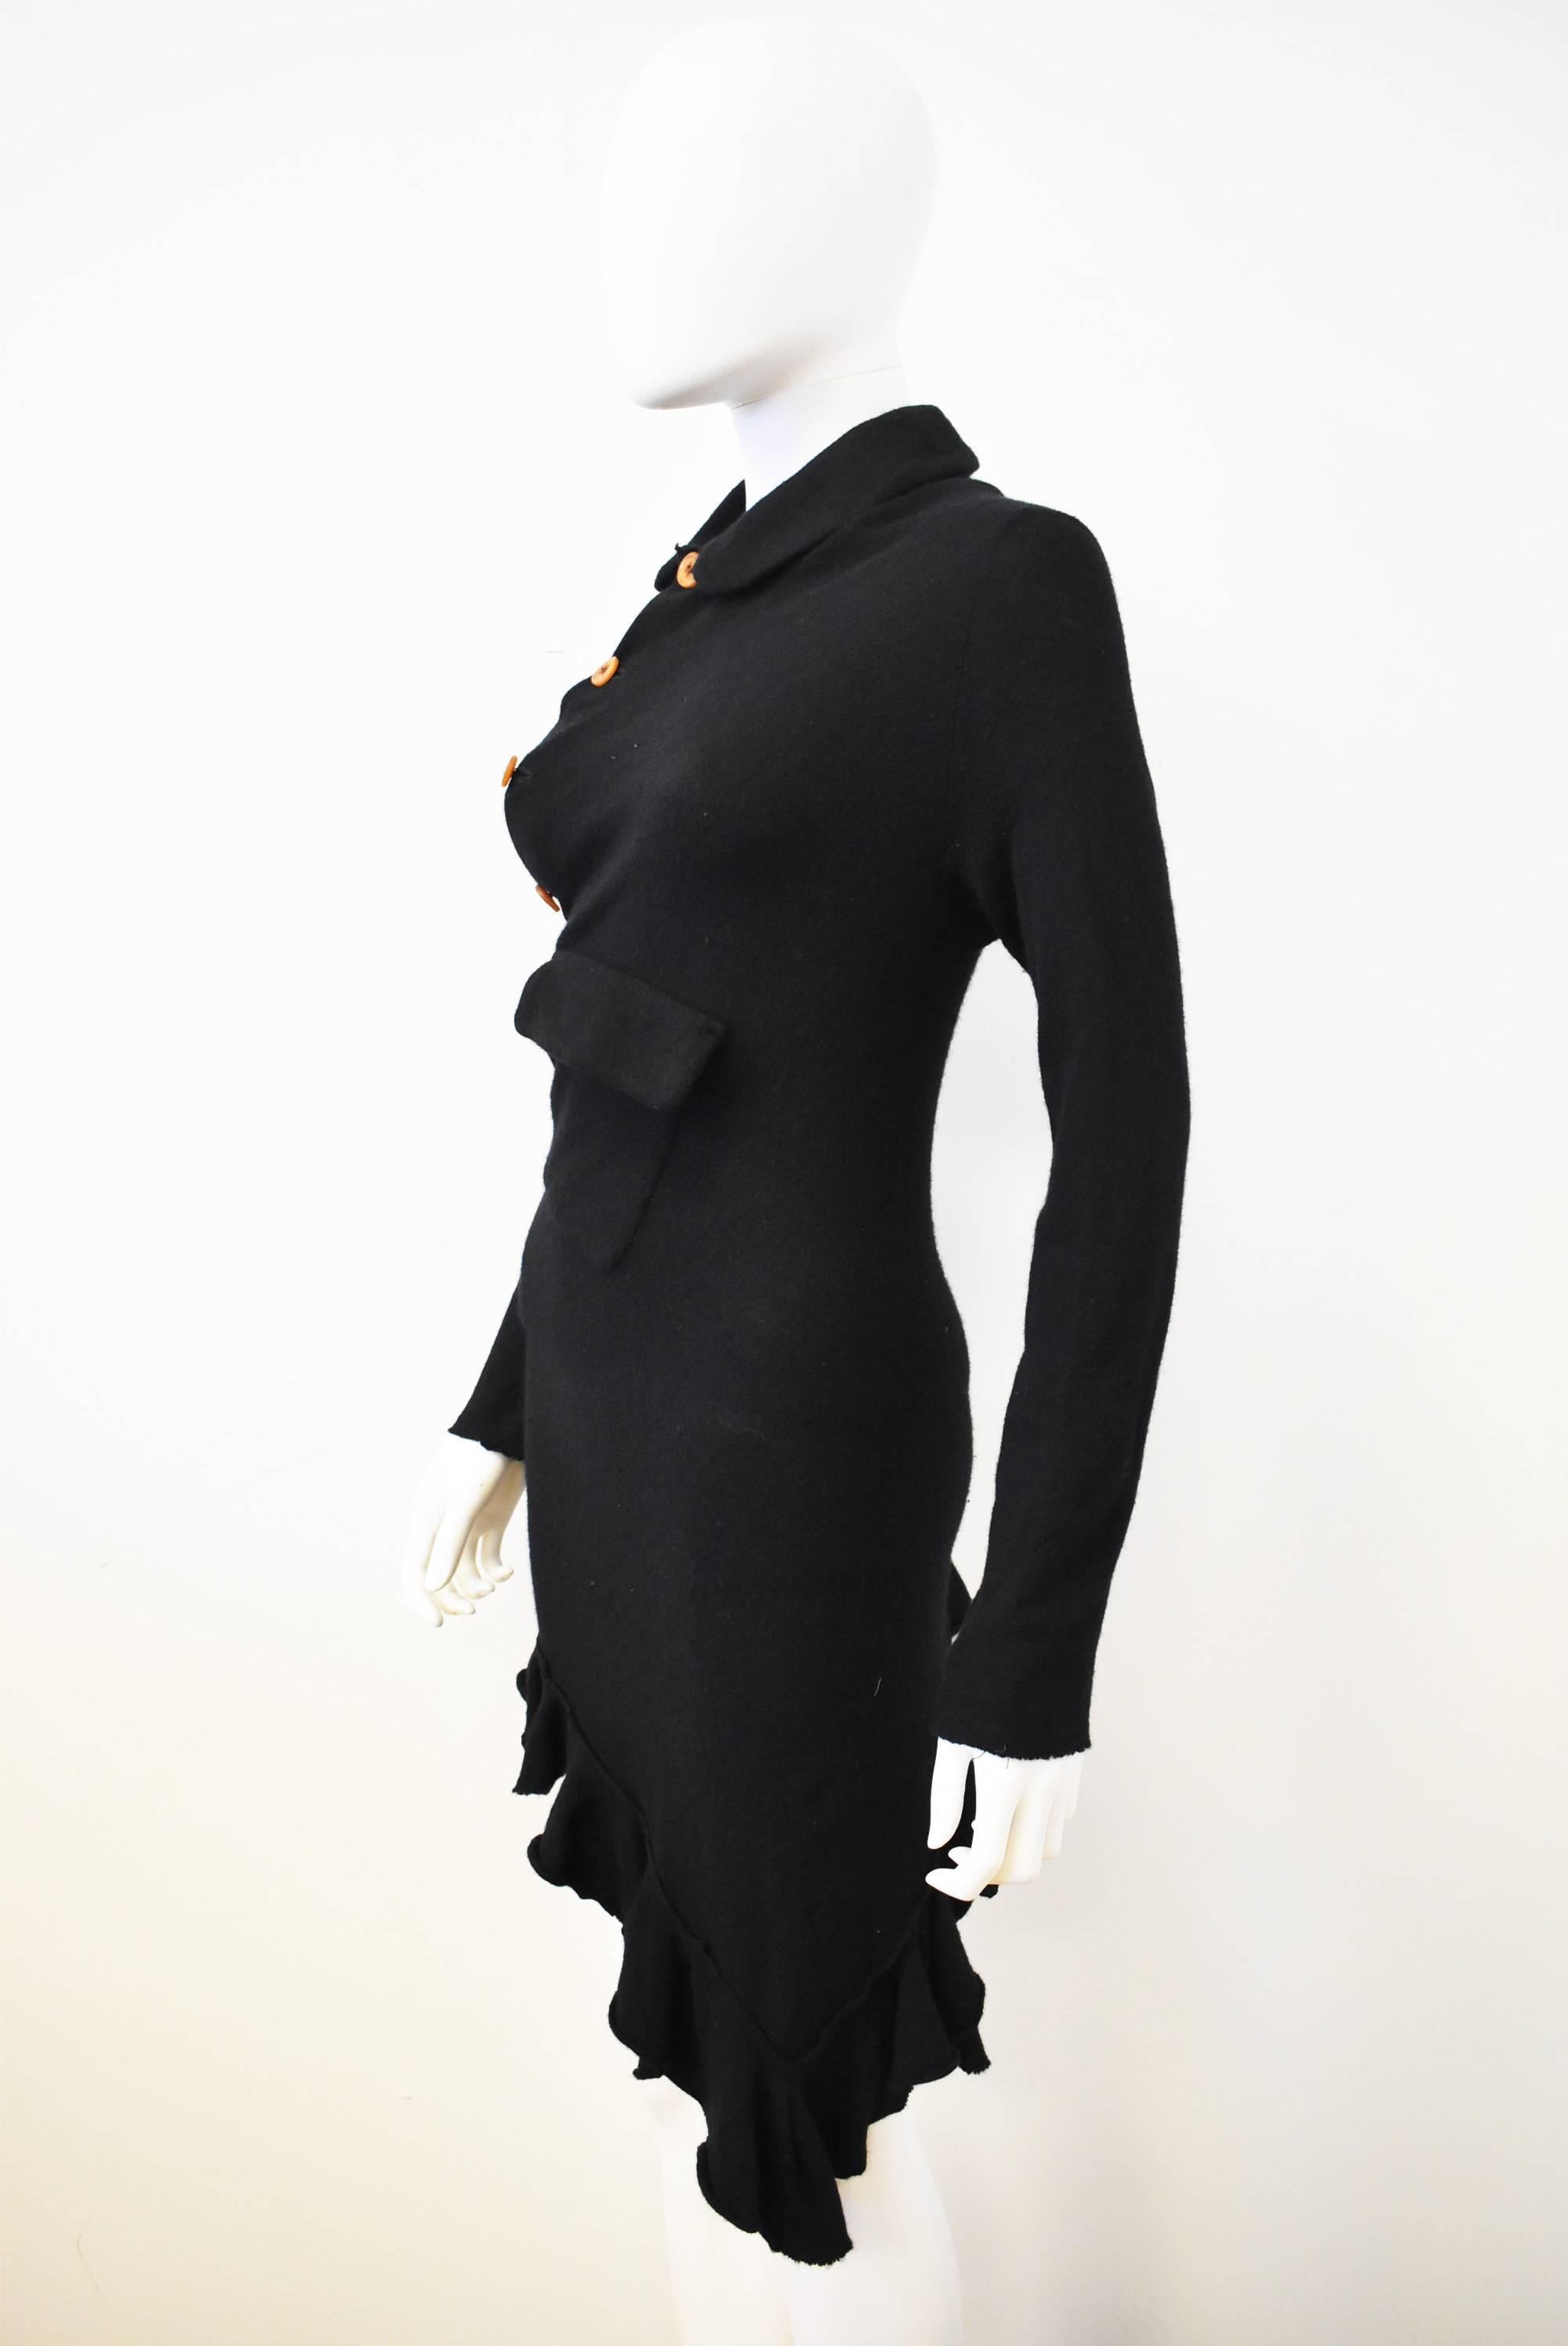 This black Comme des Garcons knitted dress from 2002 has an unusual shape with an asymmetric hem, and twisted style that flows around the body. The button up front goes across the body diagonally and created folds across the front and back. There